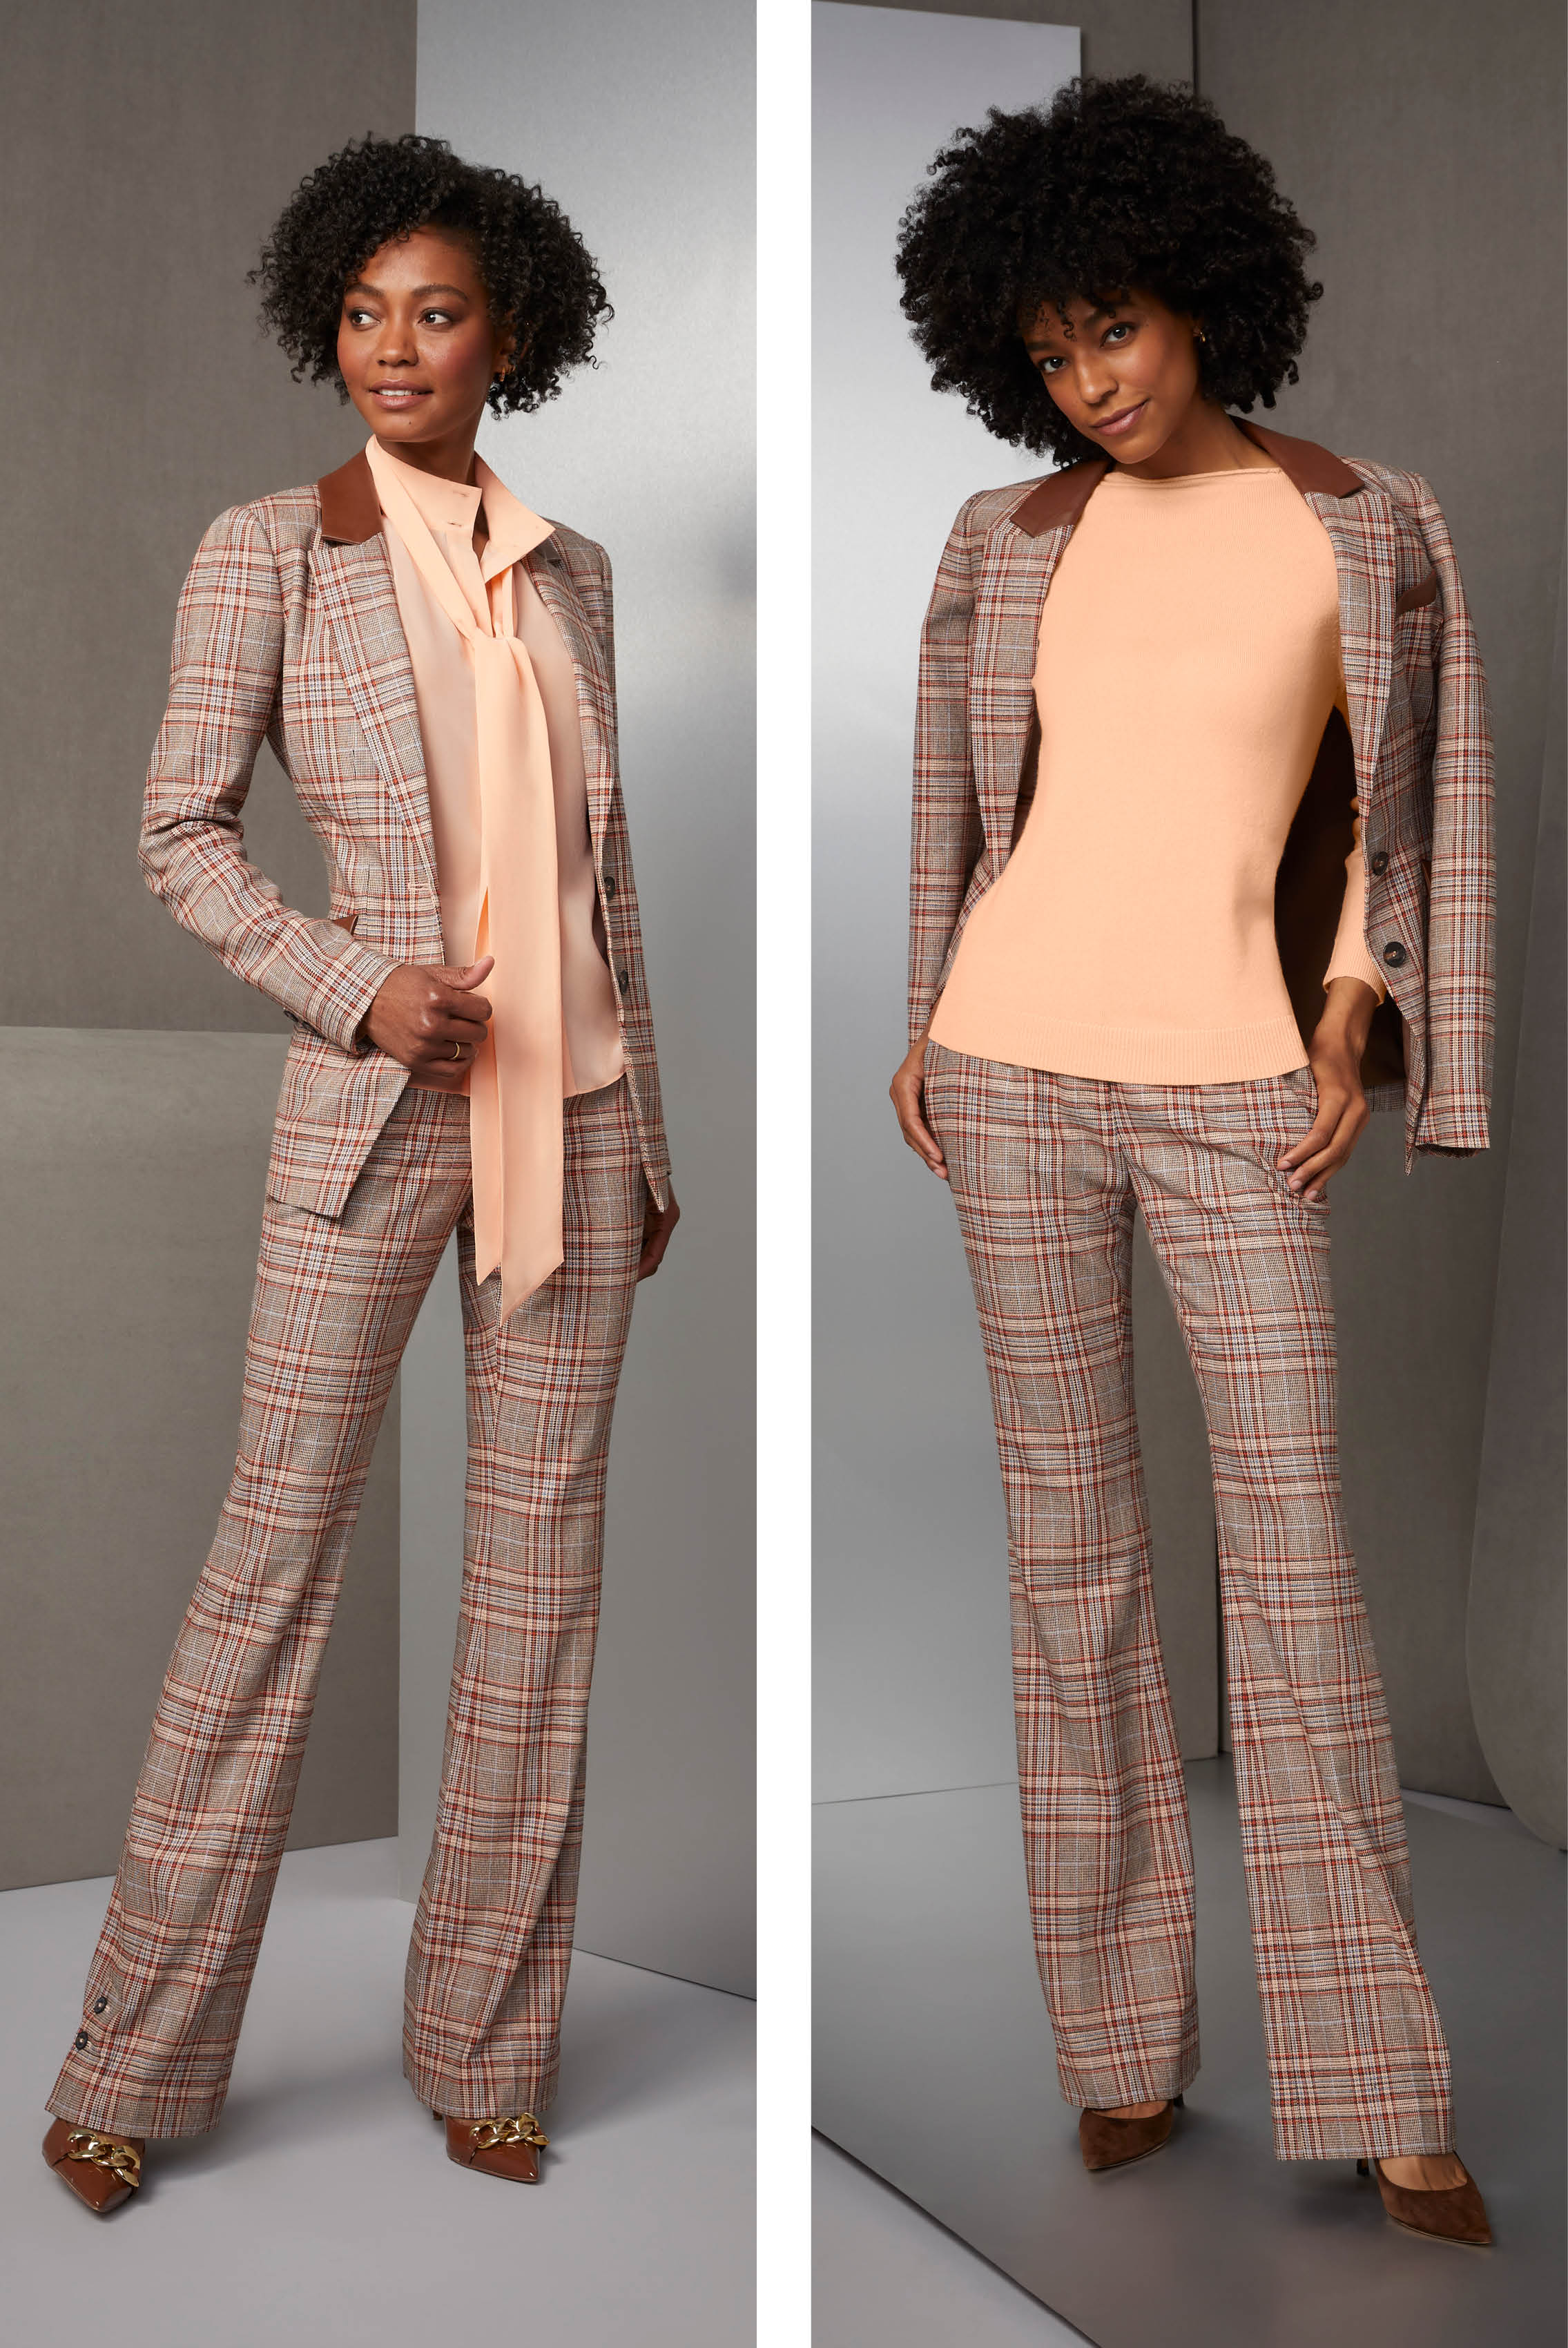 Atelier tailoring meets luxury fabrics. This sporty Italian plaid riding jacket and trousers has four soft shades. The jacket is trimmed in chocolate torte faux leather. Pair it with a shirred cashmere sweater in bright peach.